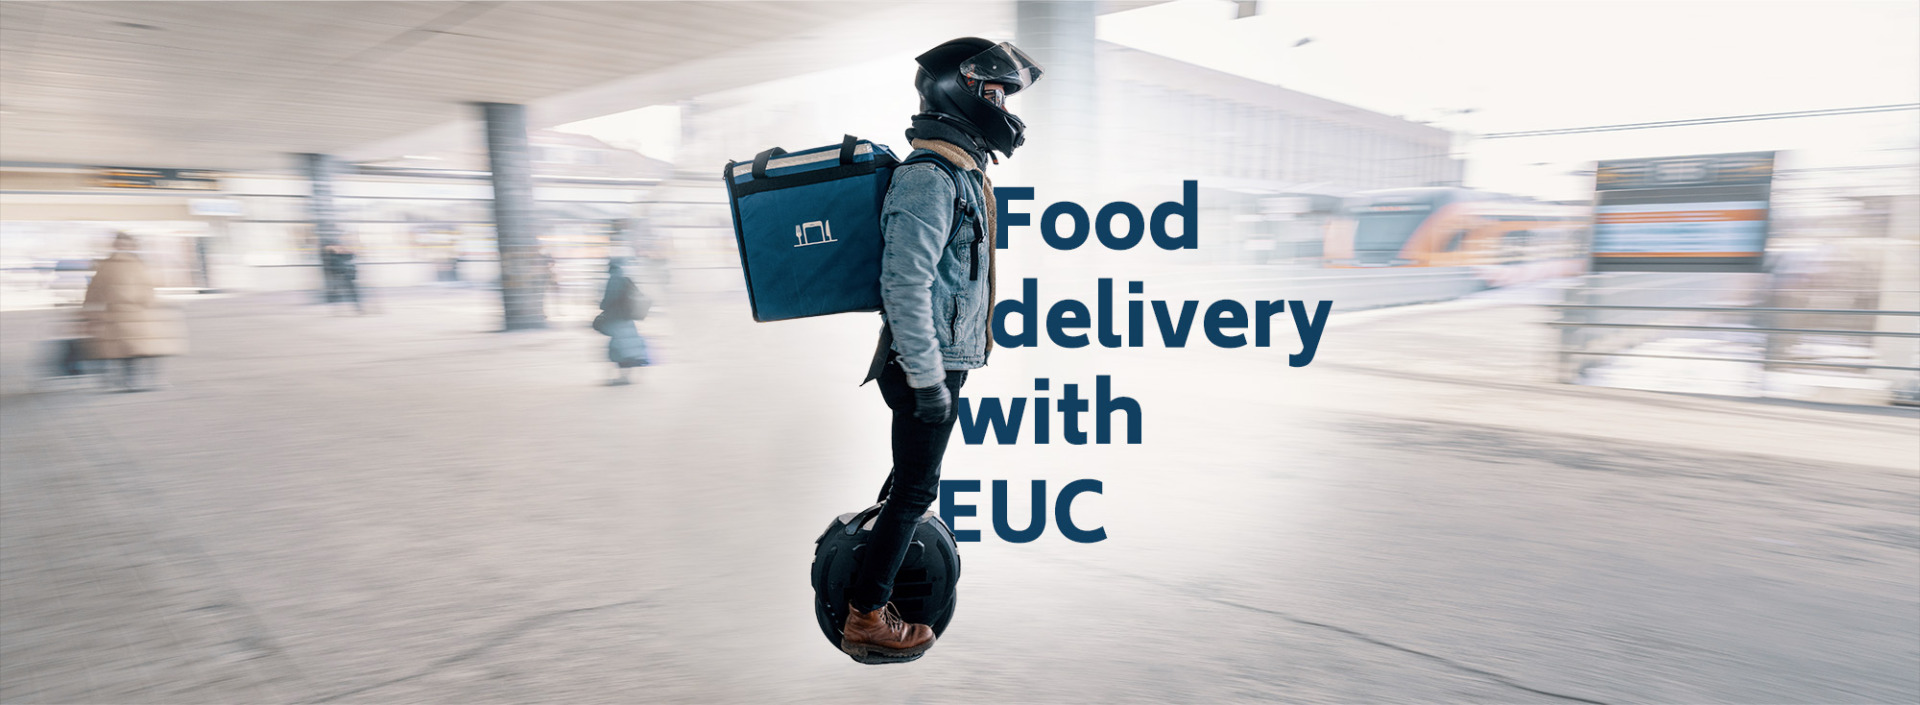 Food delivery with EUC: Earn up to 8000€ a month ad